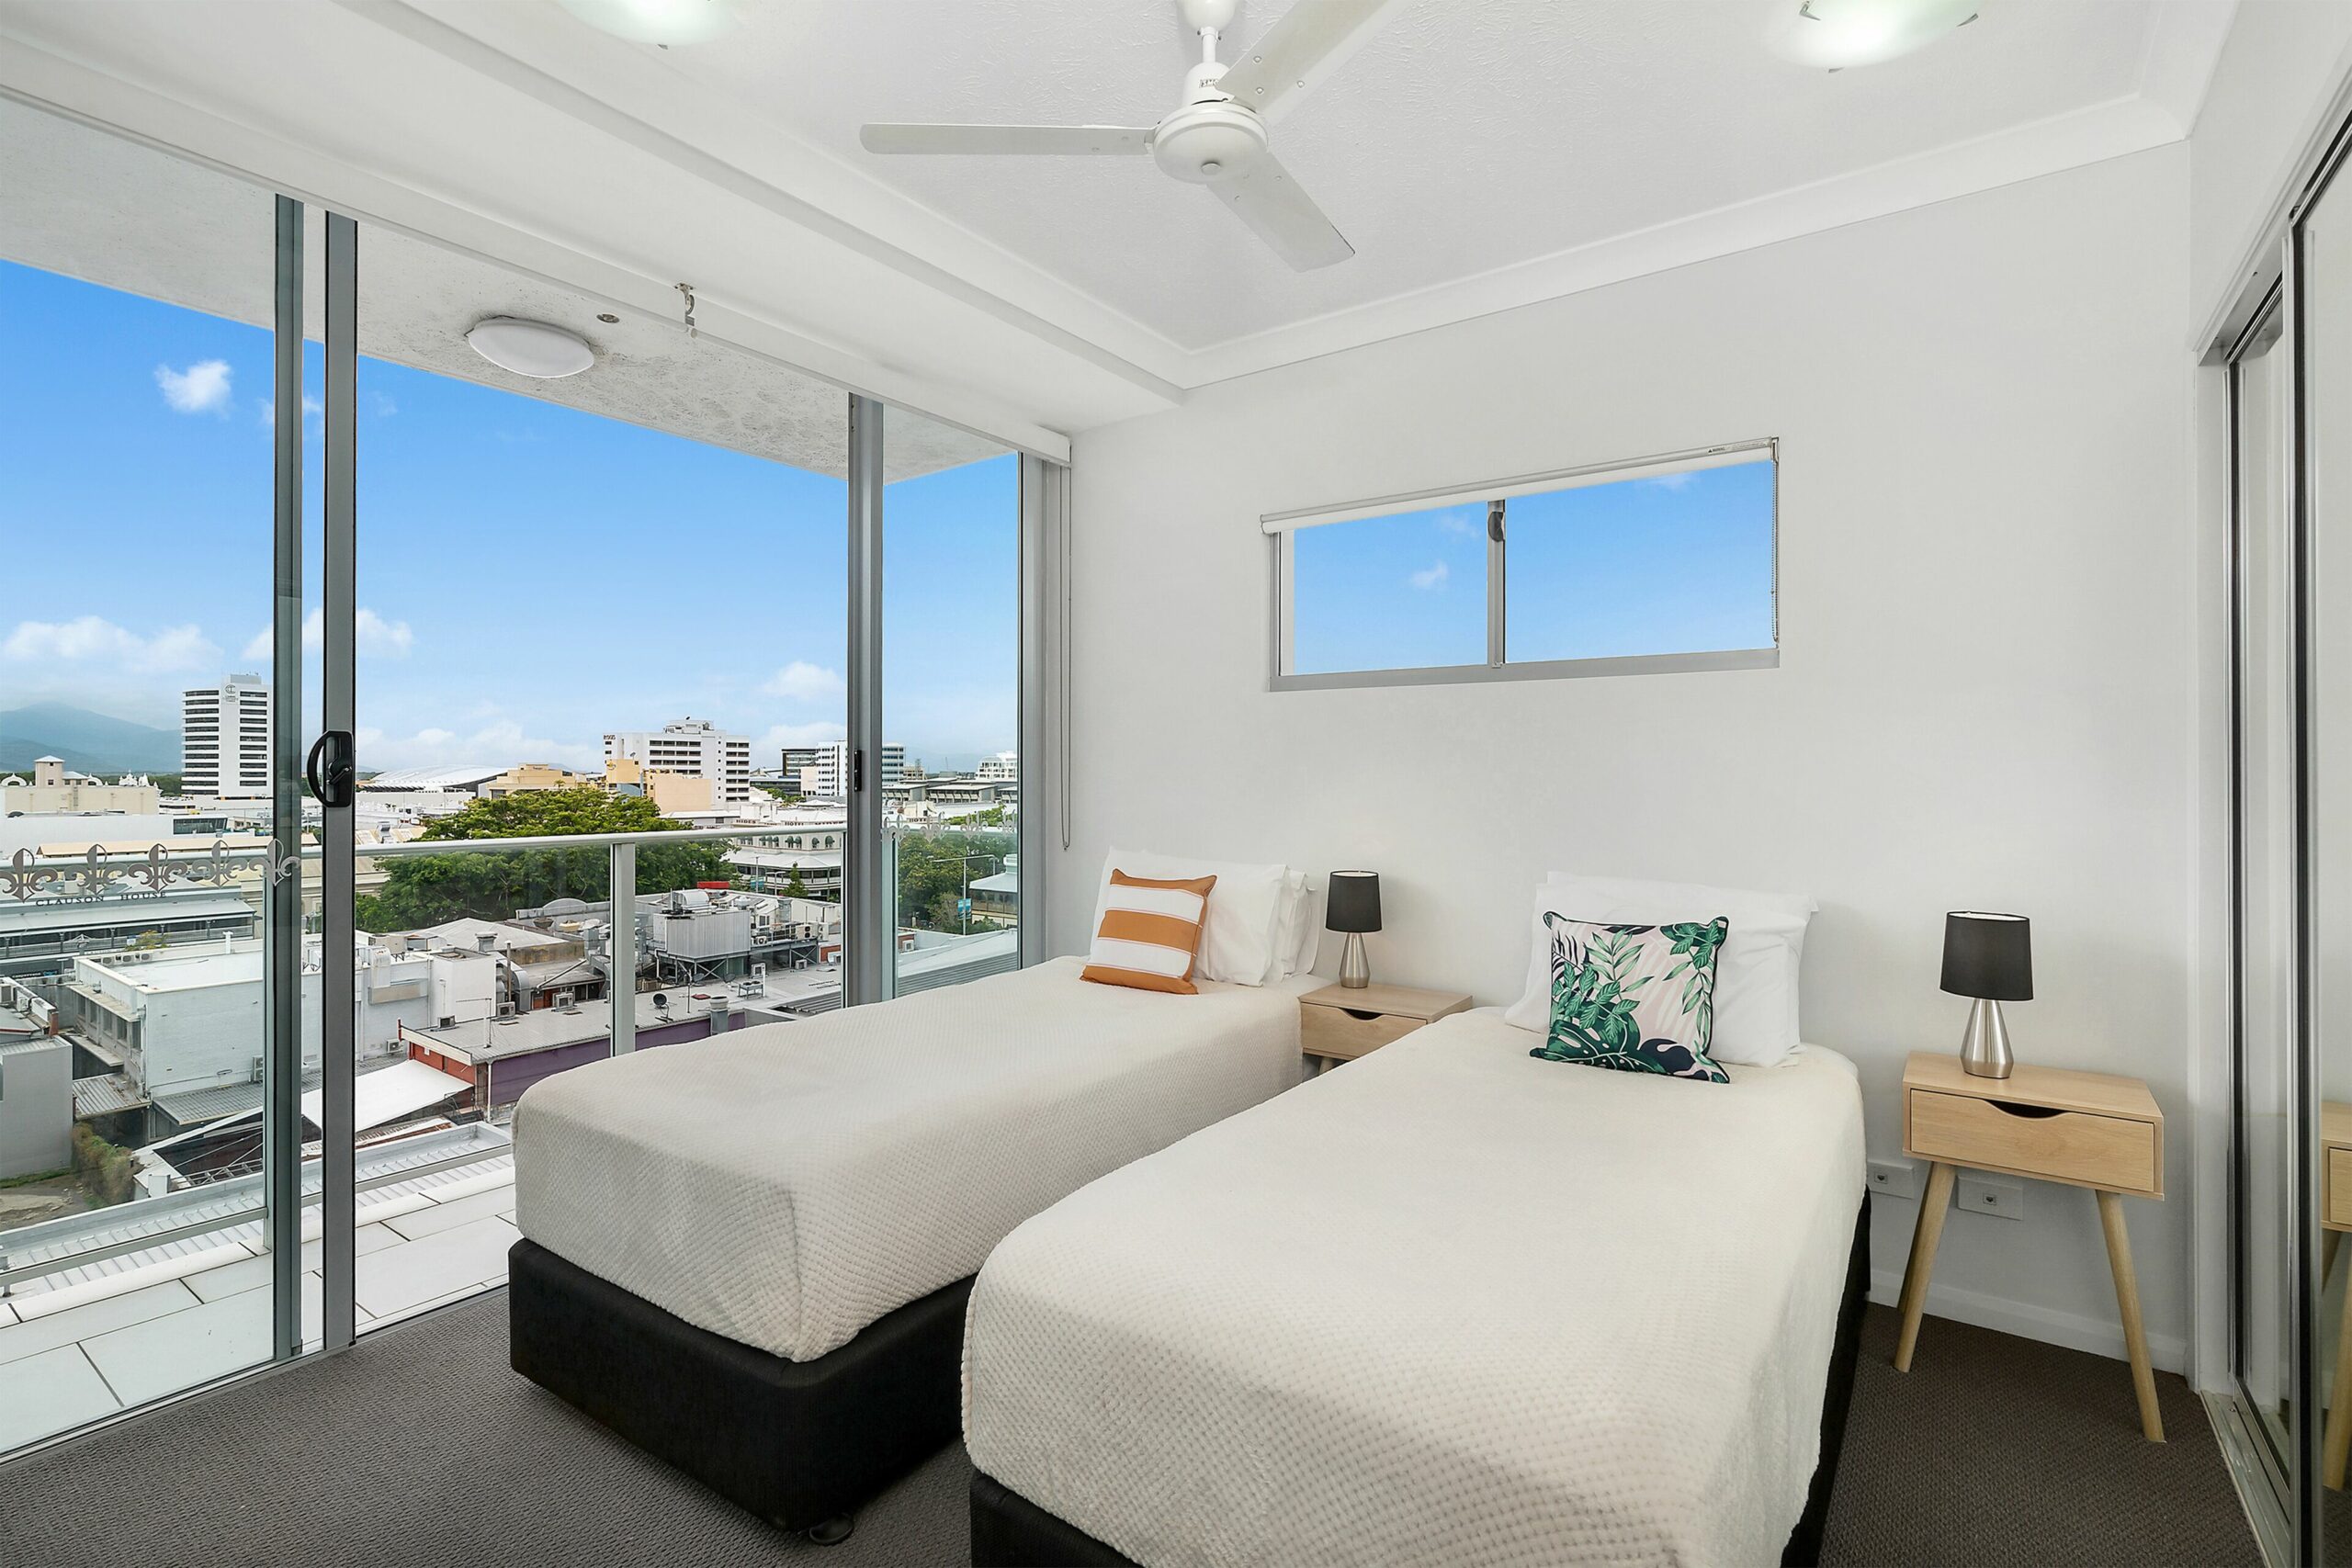 Centrepoint Apartments